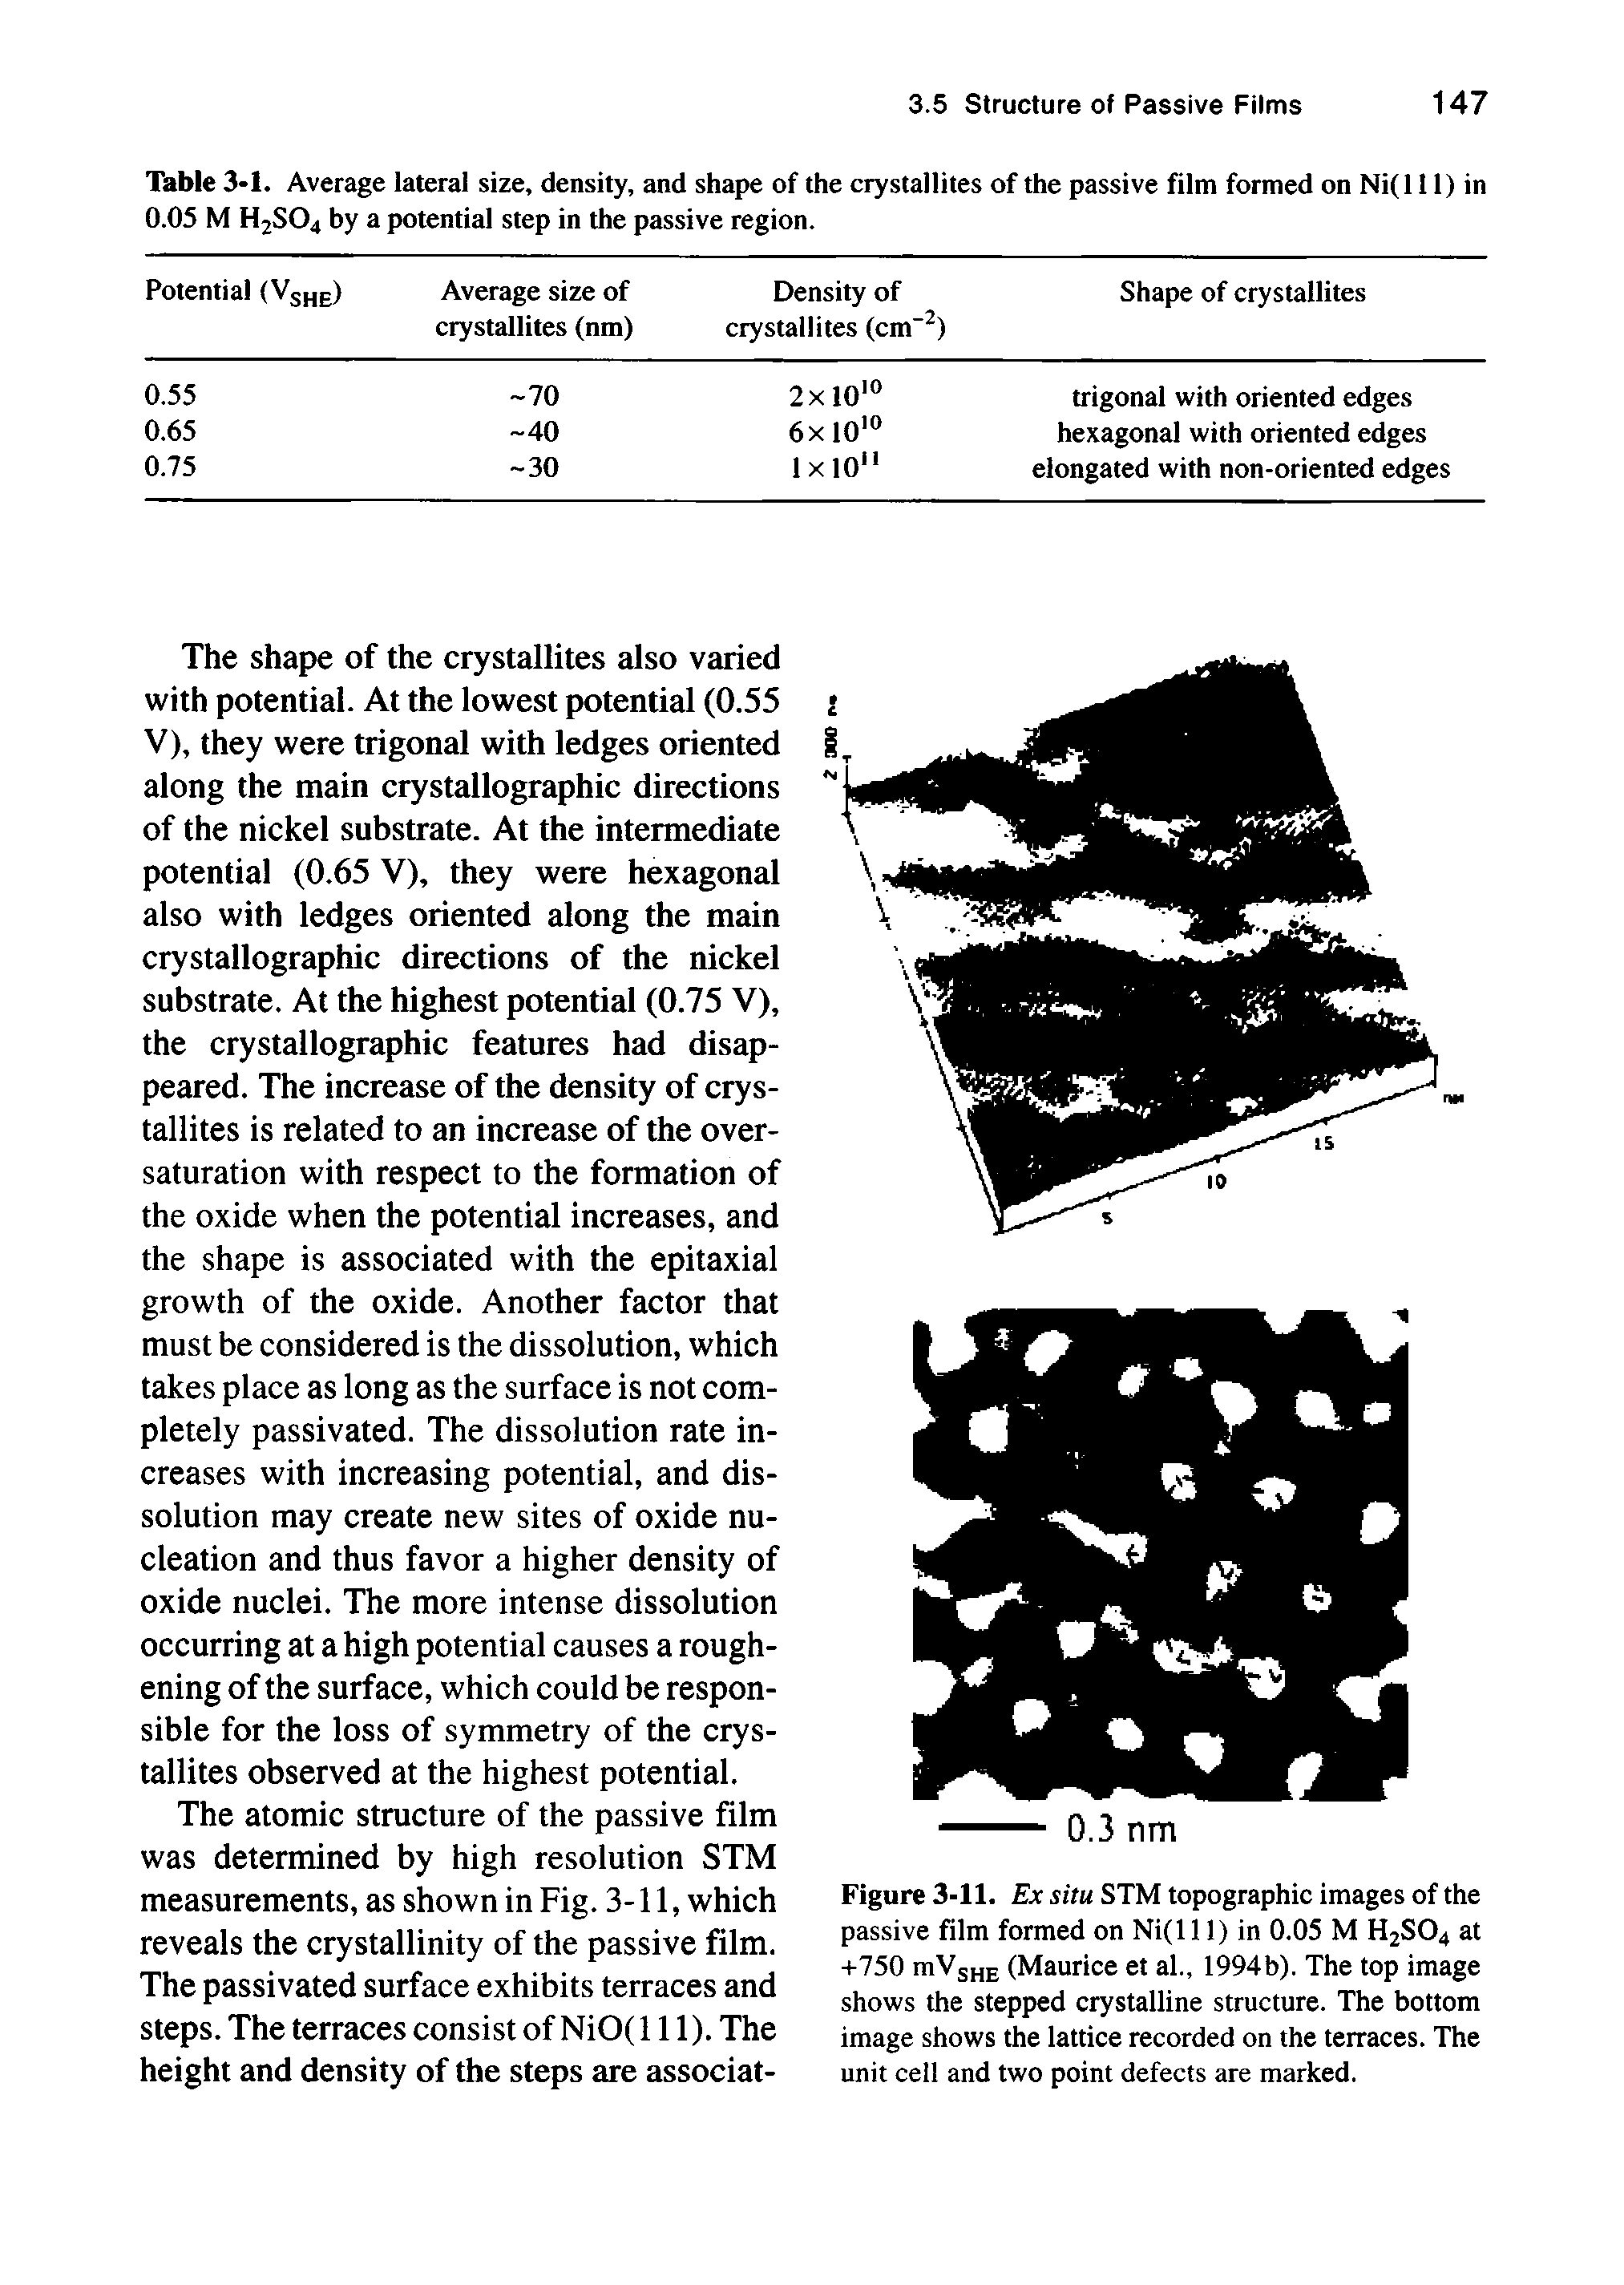 Table 3>1. Average lateral size, density, and shape of the crystallites of the passive film formed on Ni(l 11) in 0.05 M H2SO4 by a potential step in the passive region.